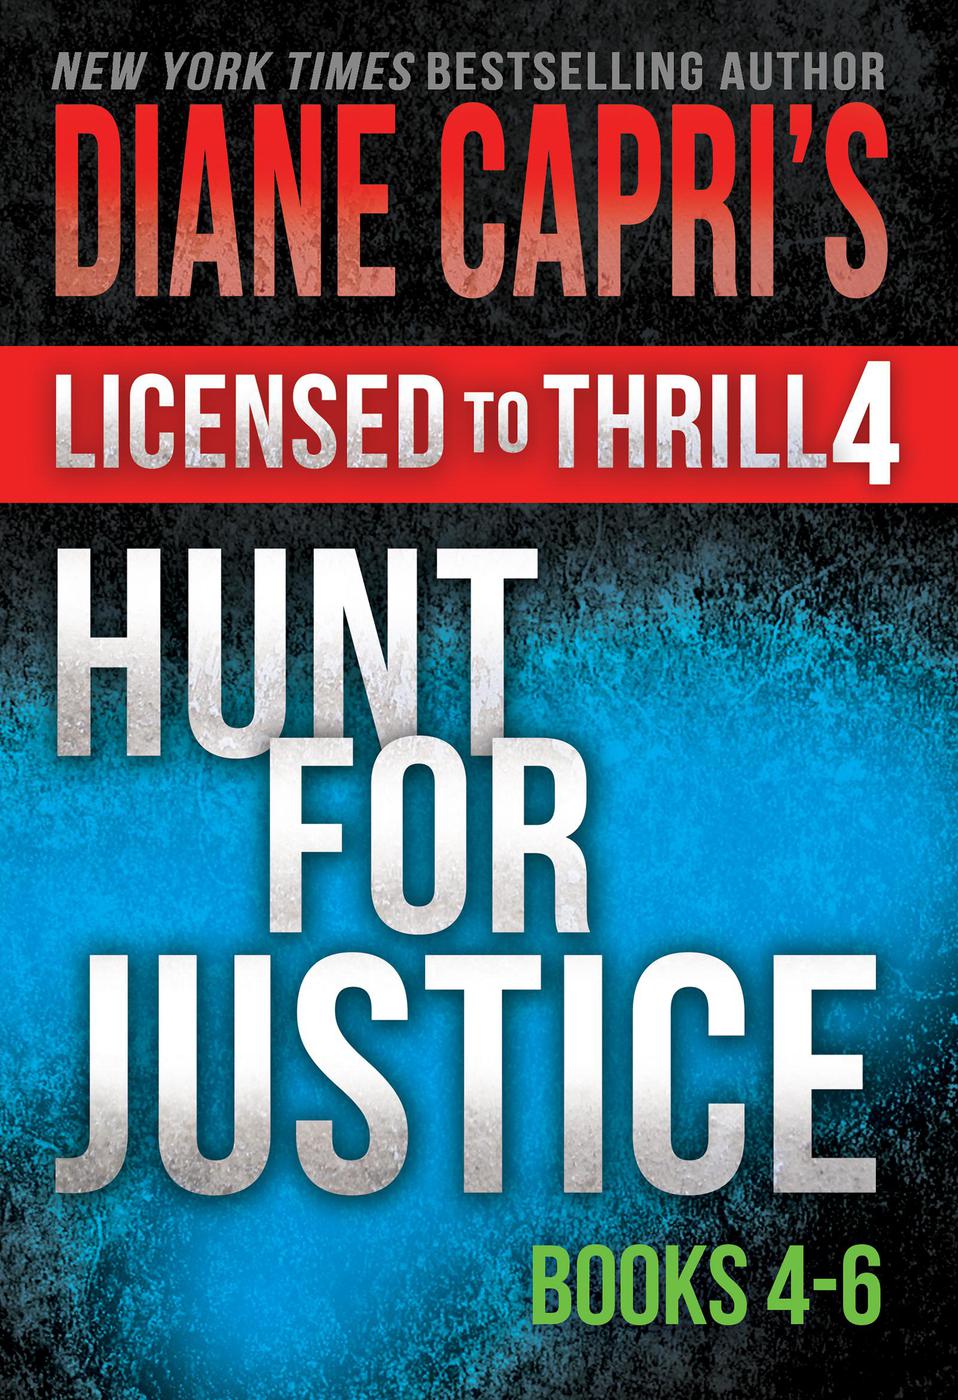 Image de couverture de Licensed to Thrill 4: Hunt For Justice Series Books 4 - 6 (Diane Capri’s Licensed to Thrill Sets, #4) [electronic resource] :